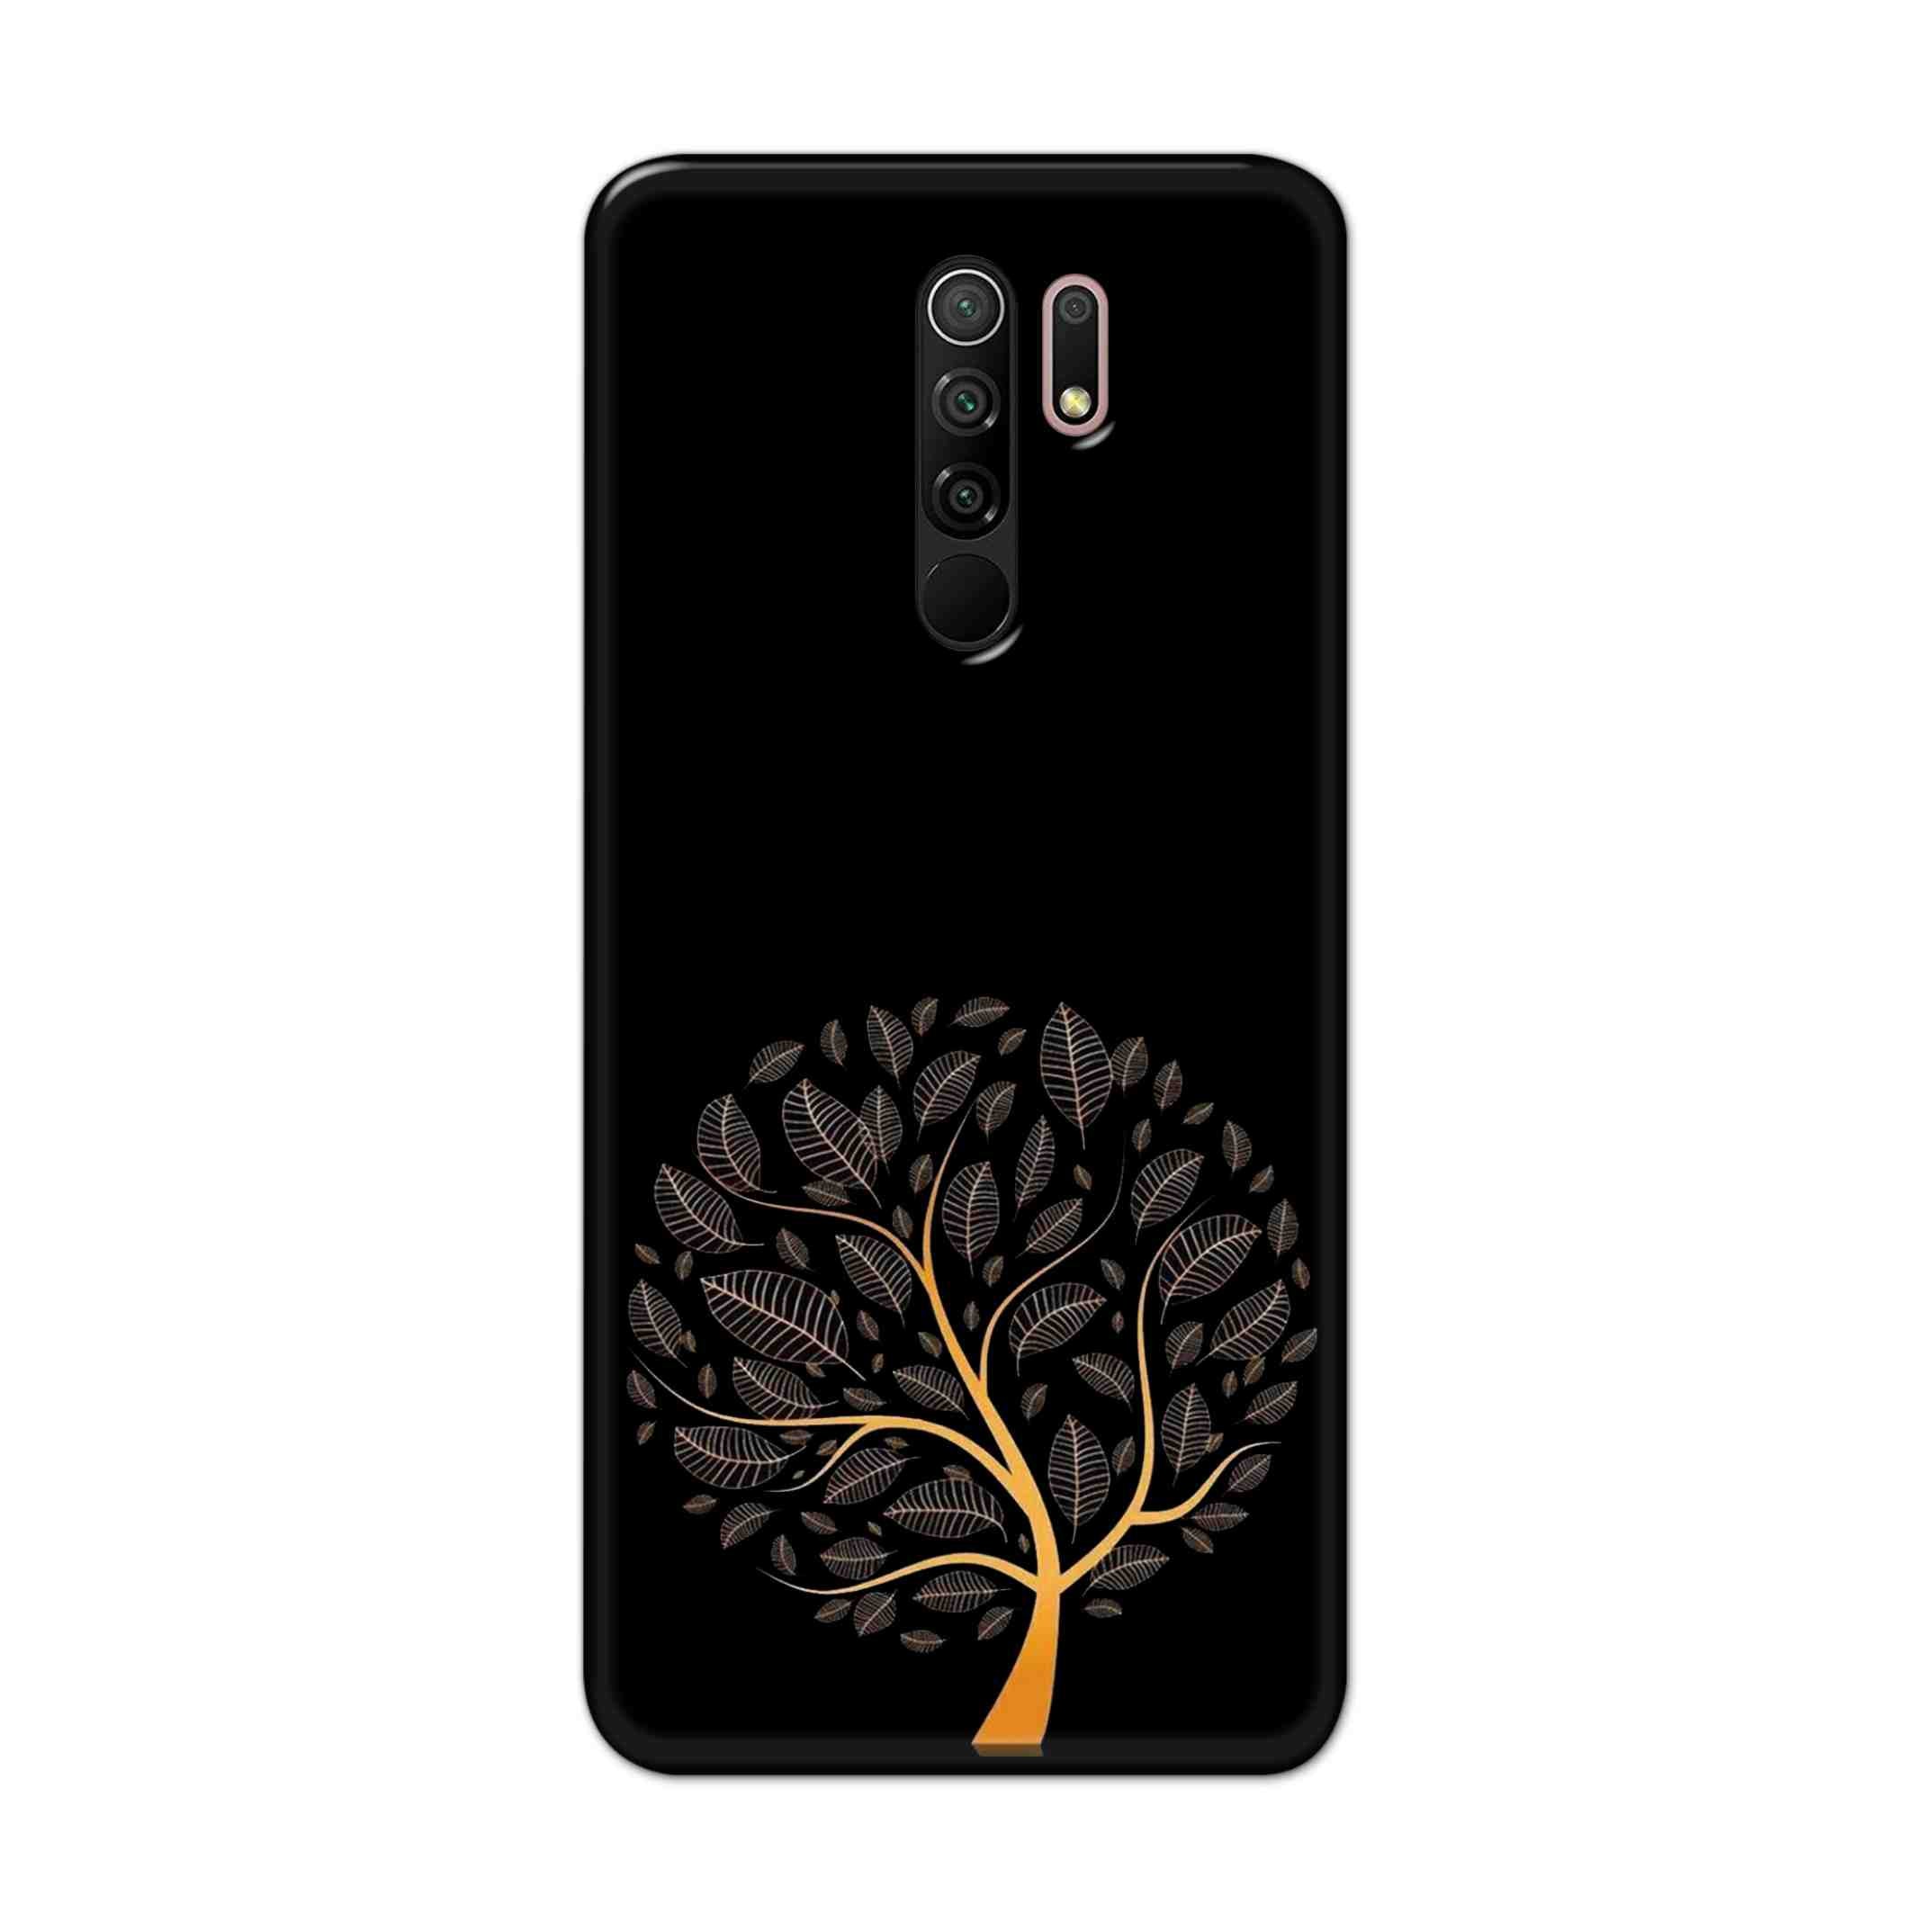 Buy Golden Tree Hard Back Mobile Phone Case Cover For Xiaomi Redmi 9 Prime Online